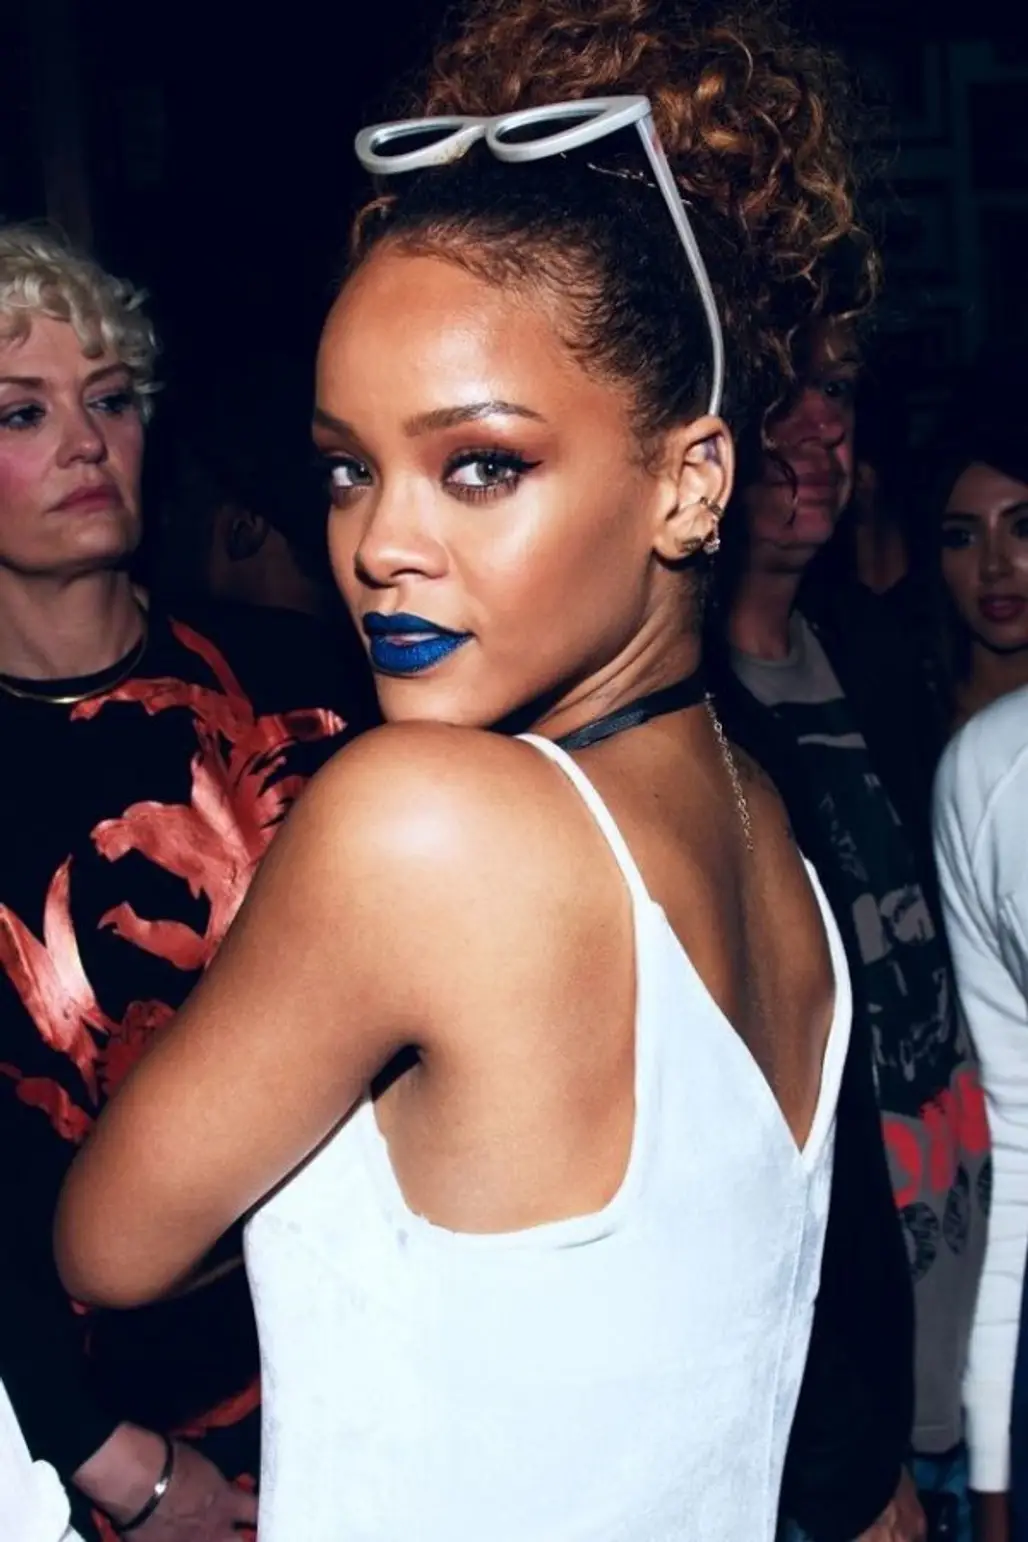 This Epic Glittery Blue Lipstick Was Actually Eyeliner